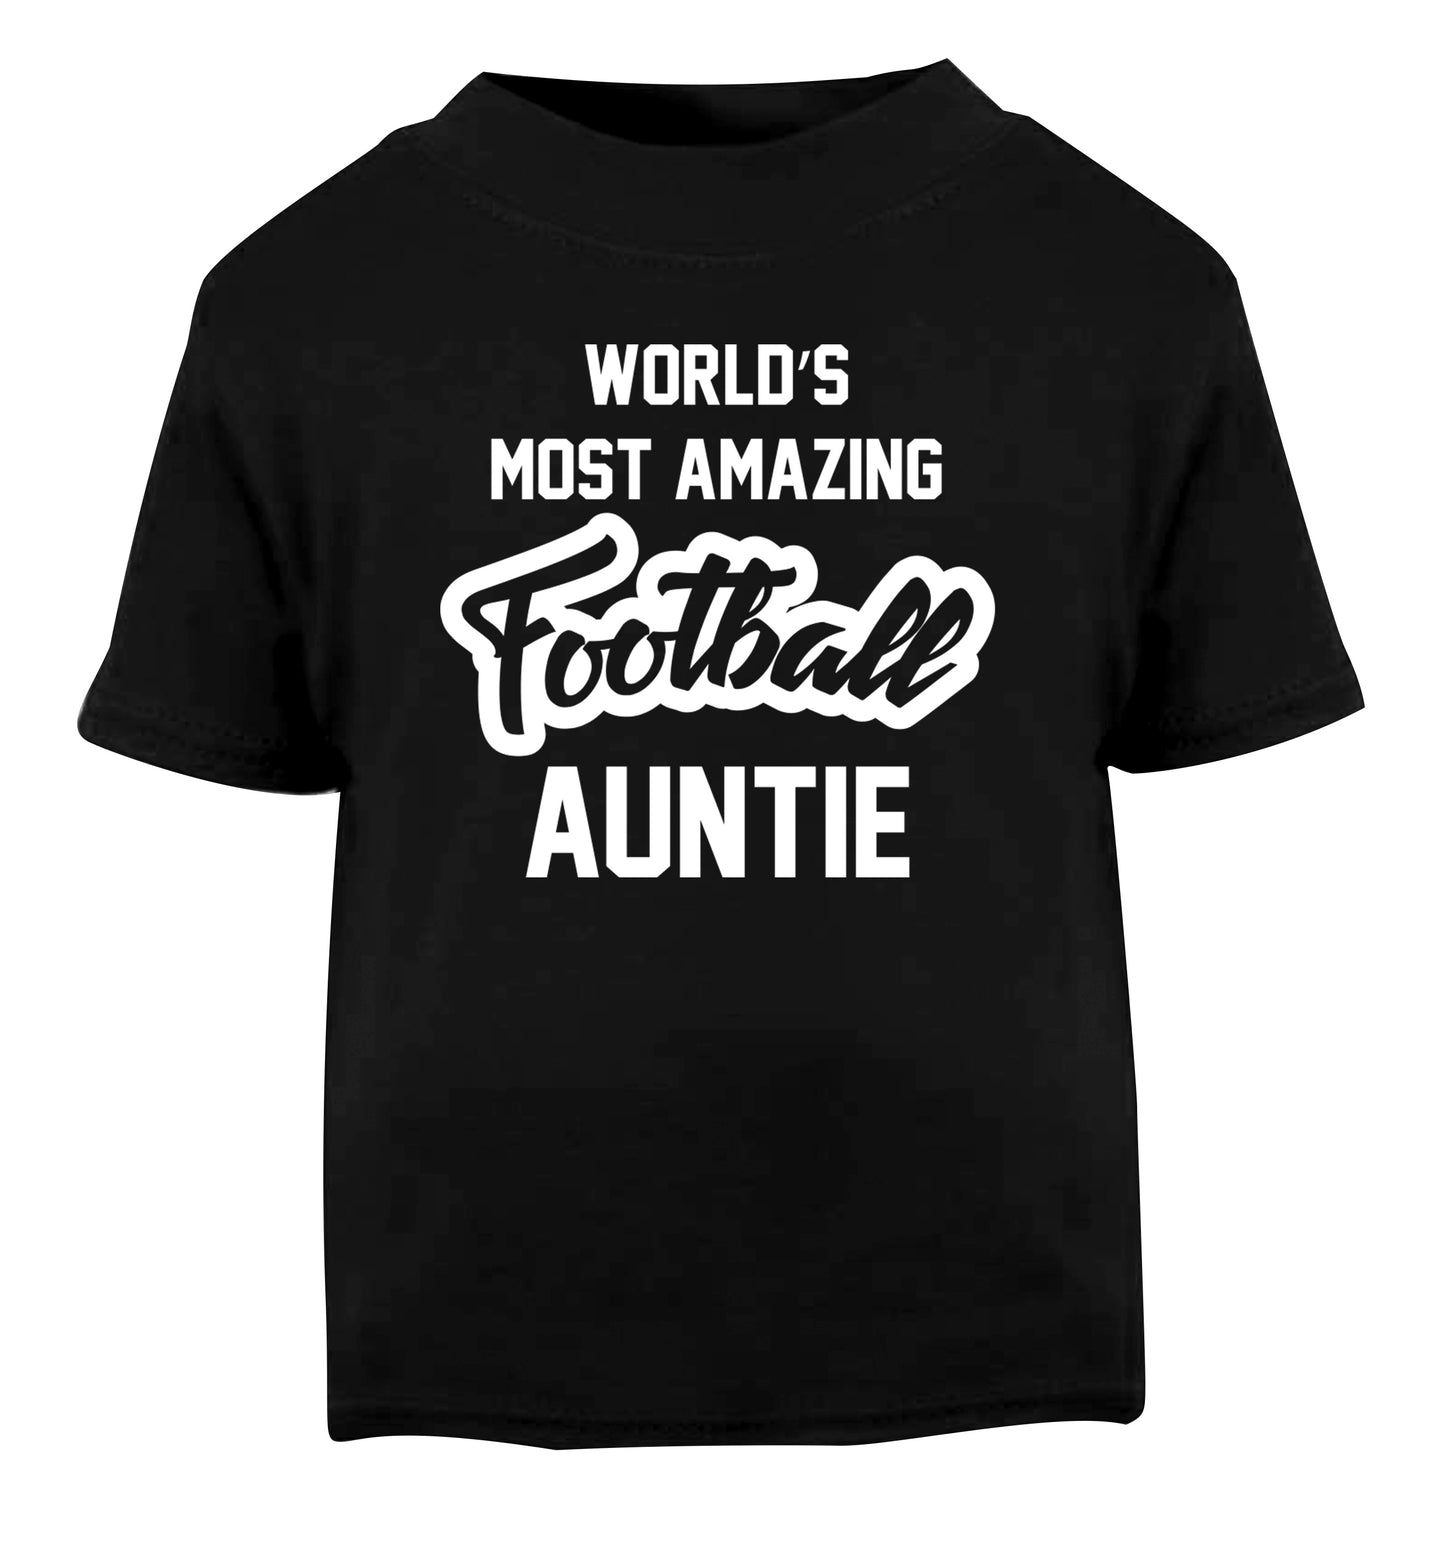 Worlds most amazing football auntie Black Baby Toddler Tshirt 2 years